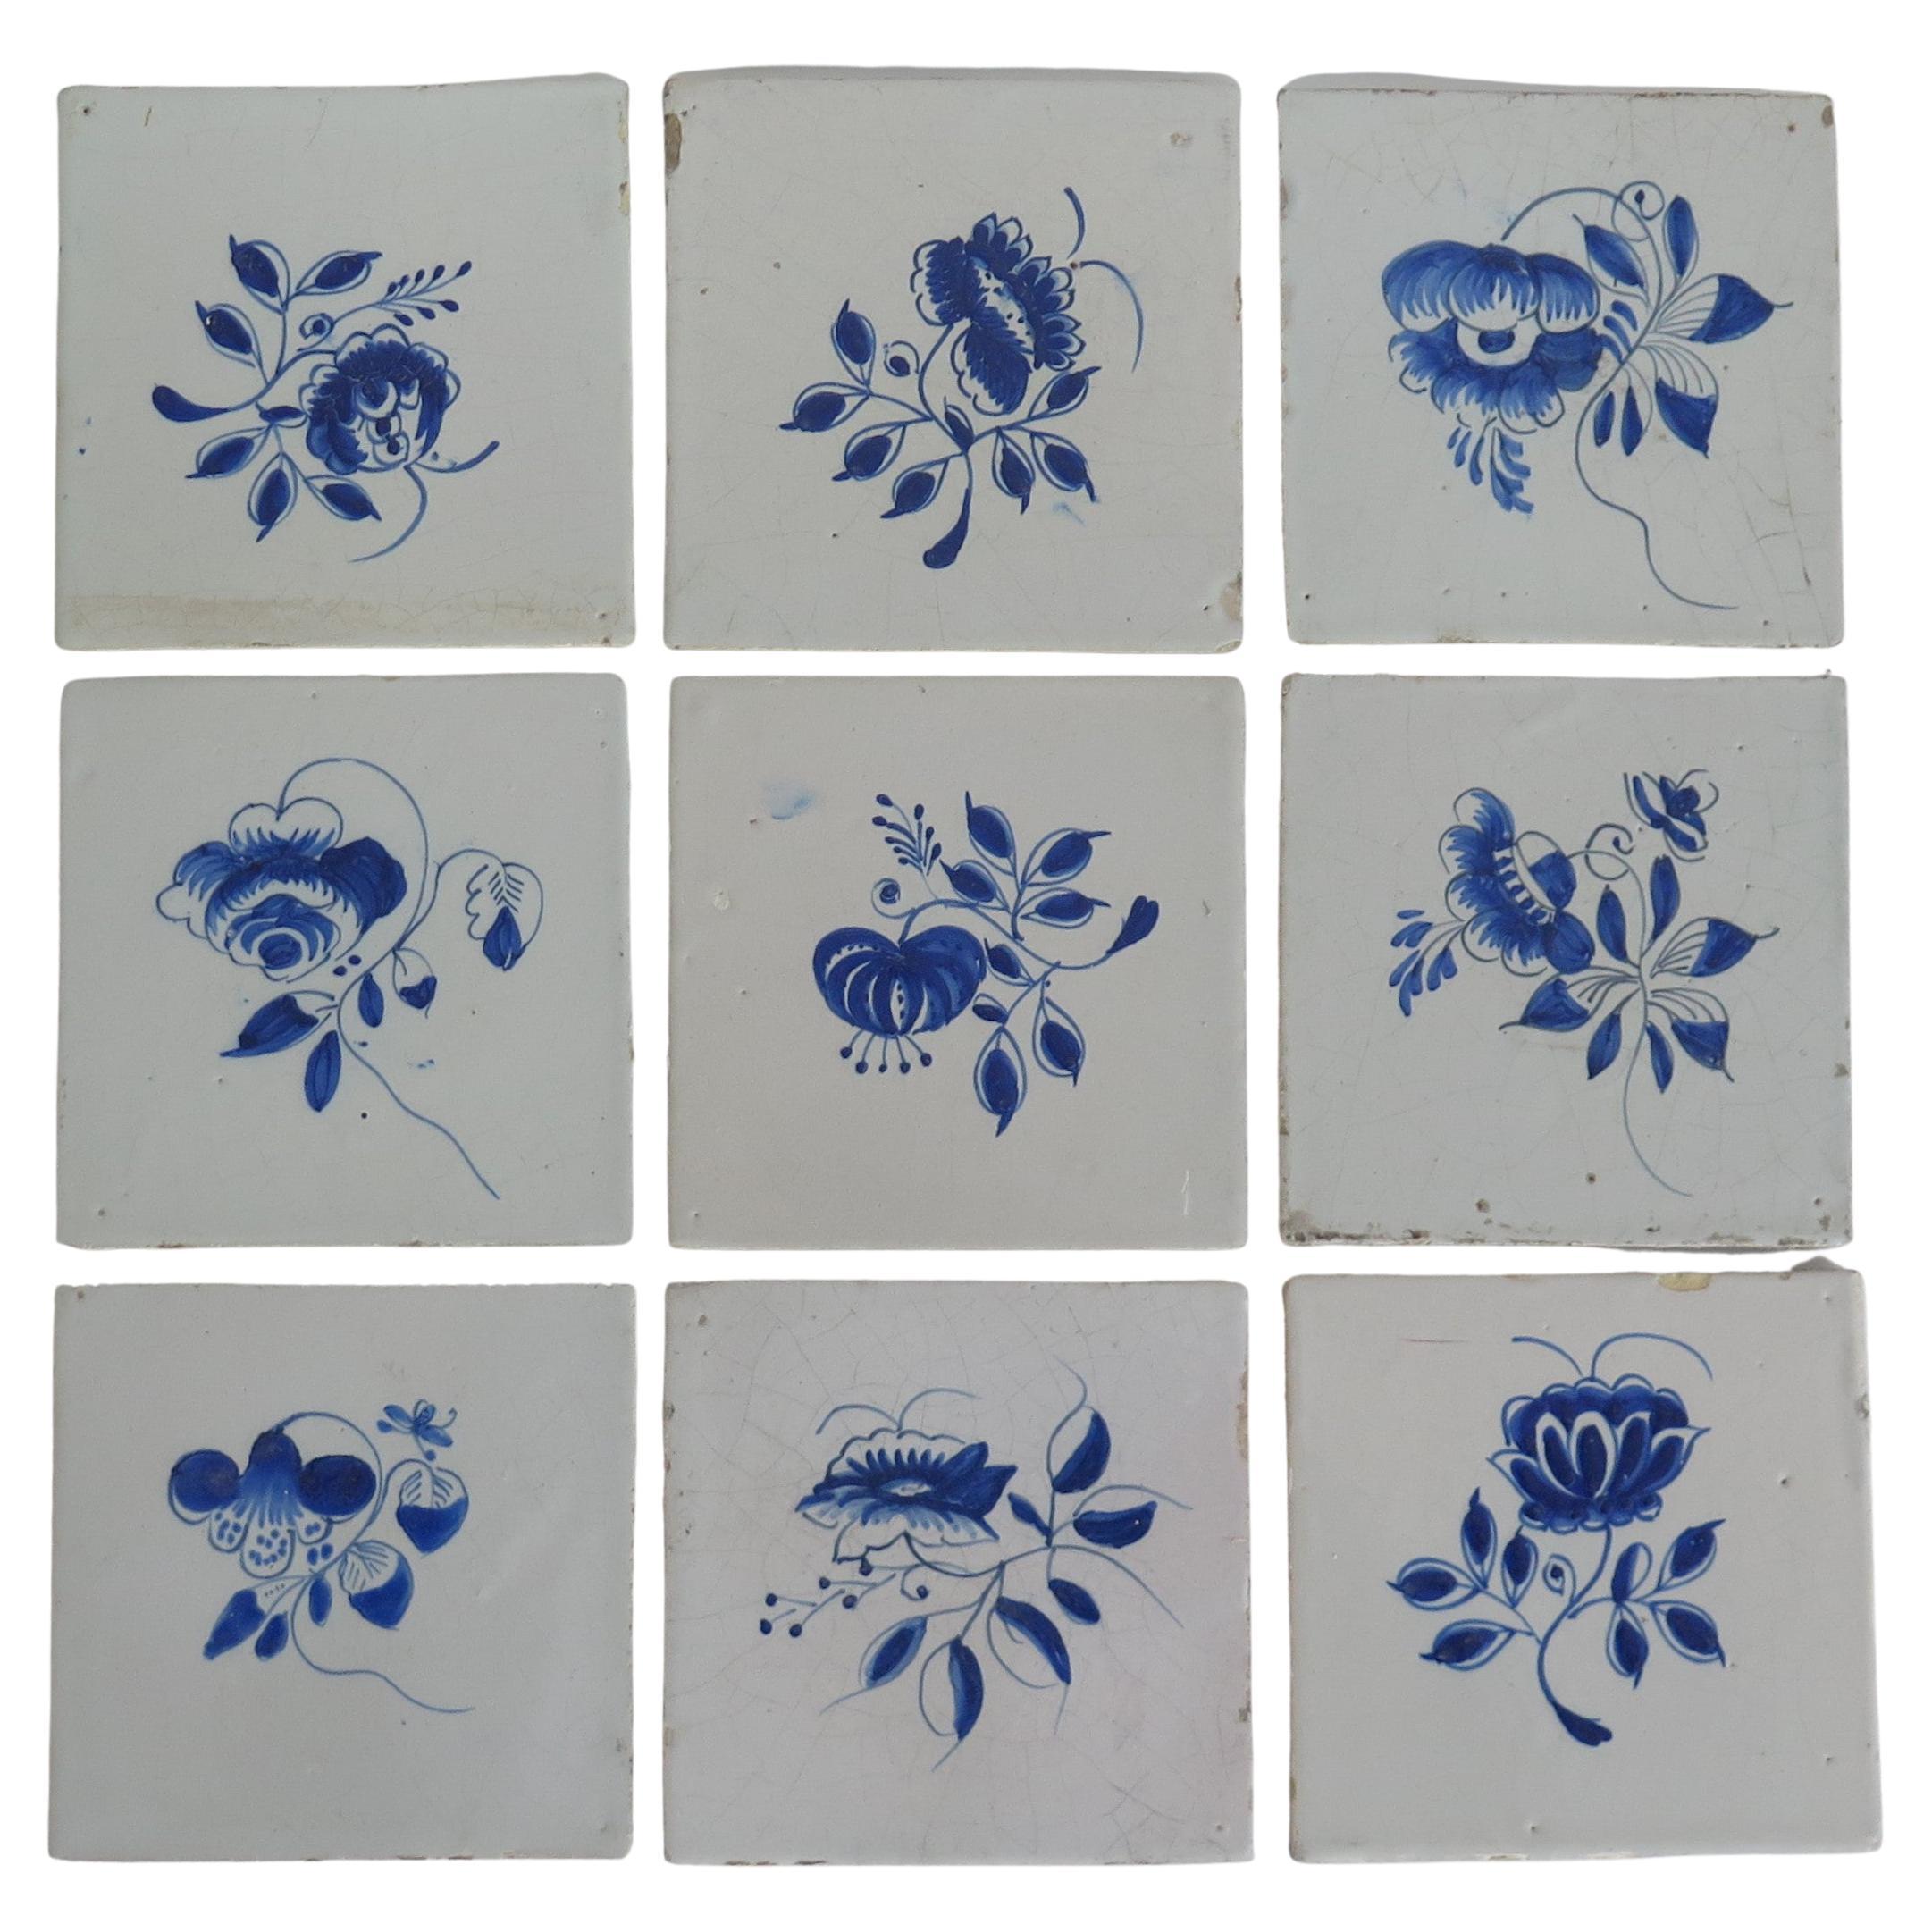 NINE 18th Century Delft Wall Tiles Blue & White Flowers & Insects Netherlands